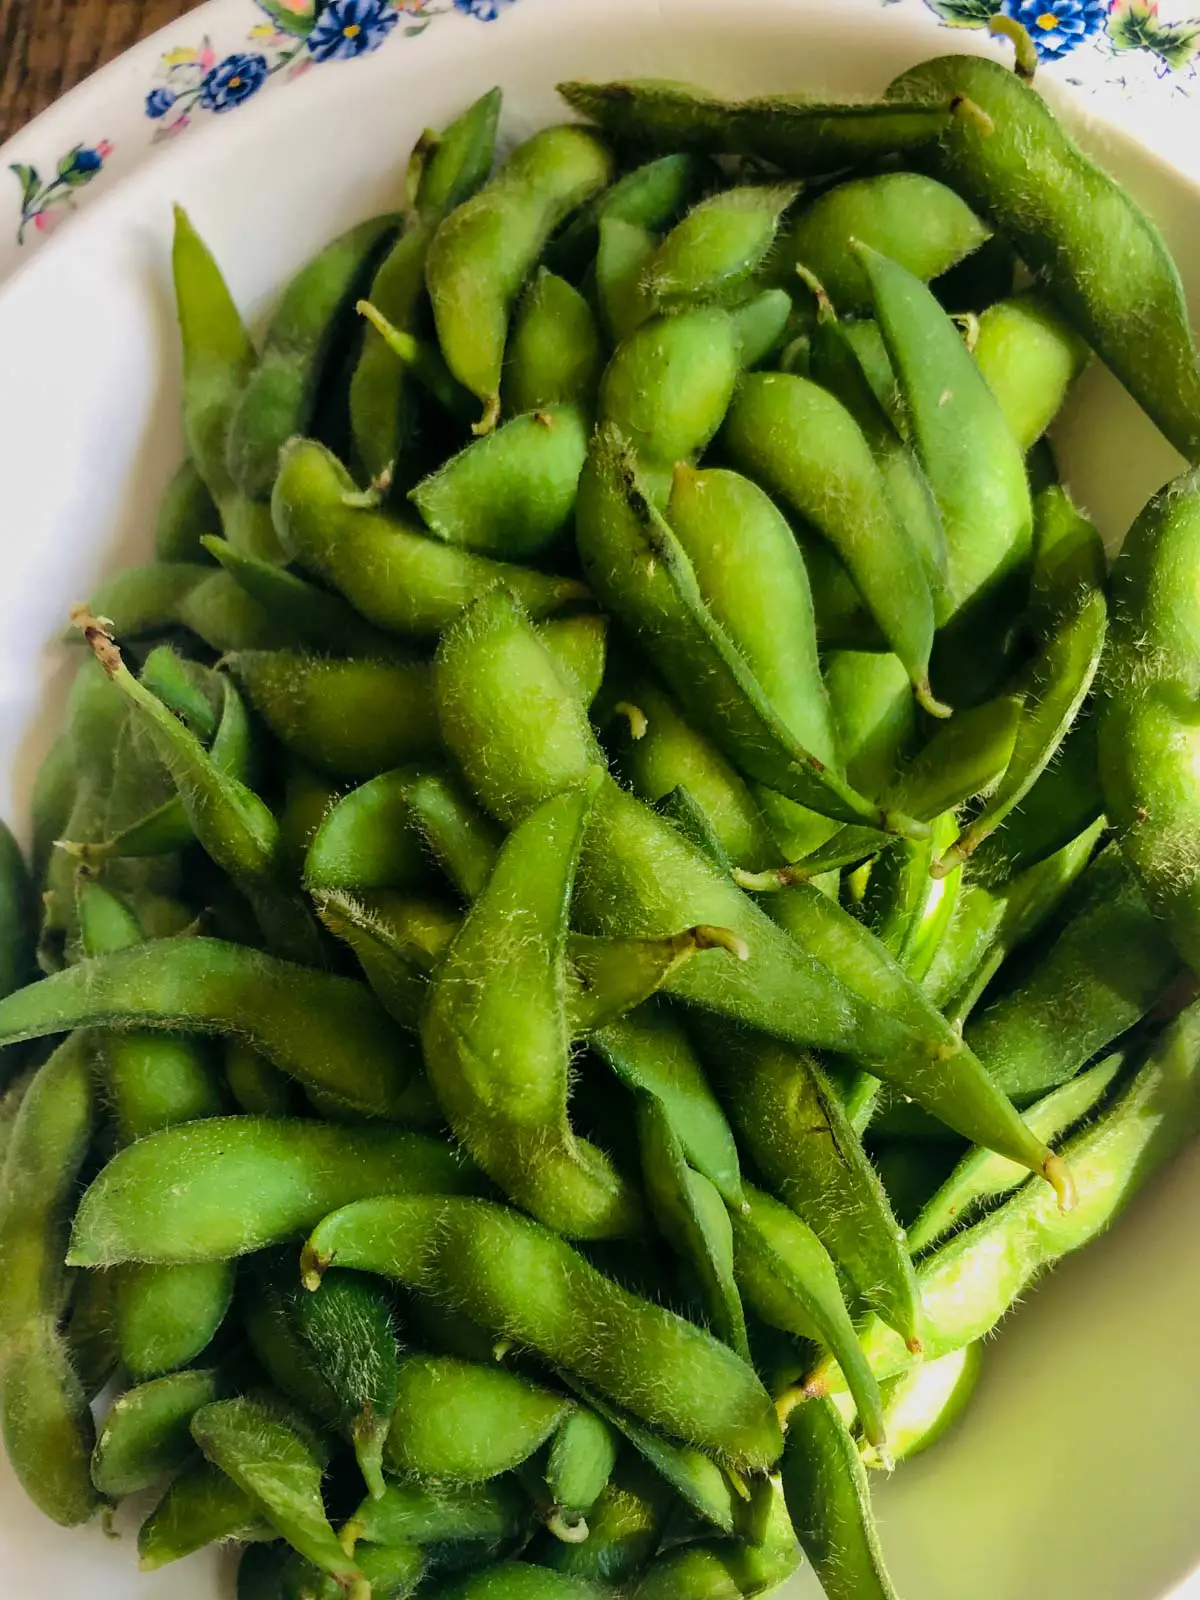 Edamame in their pods in a white bowl